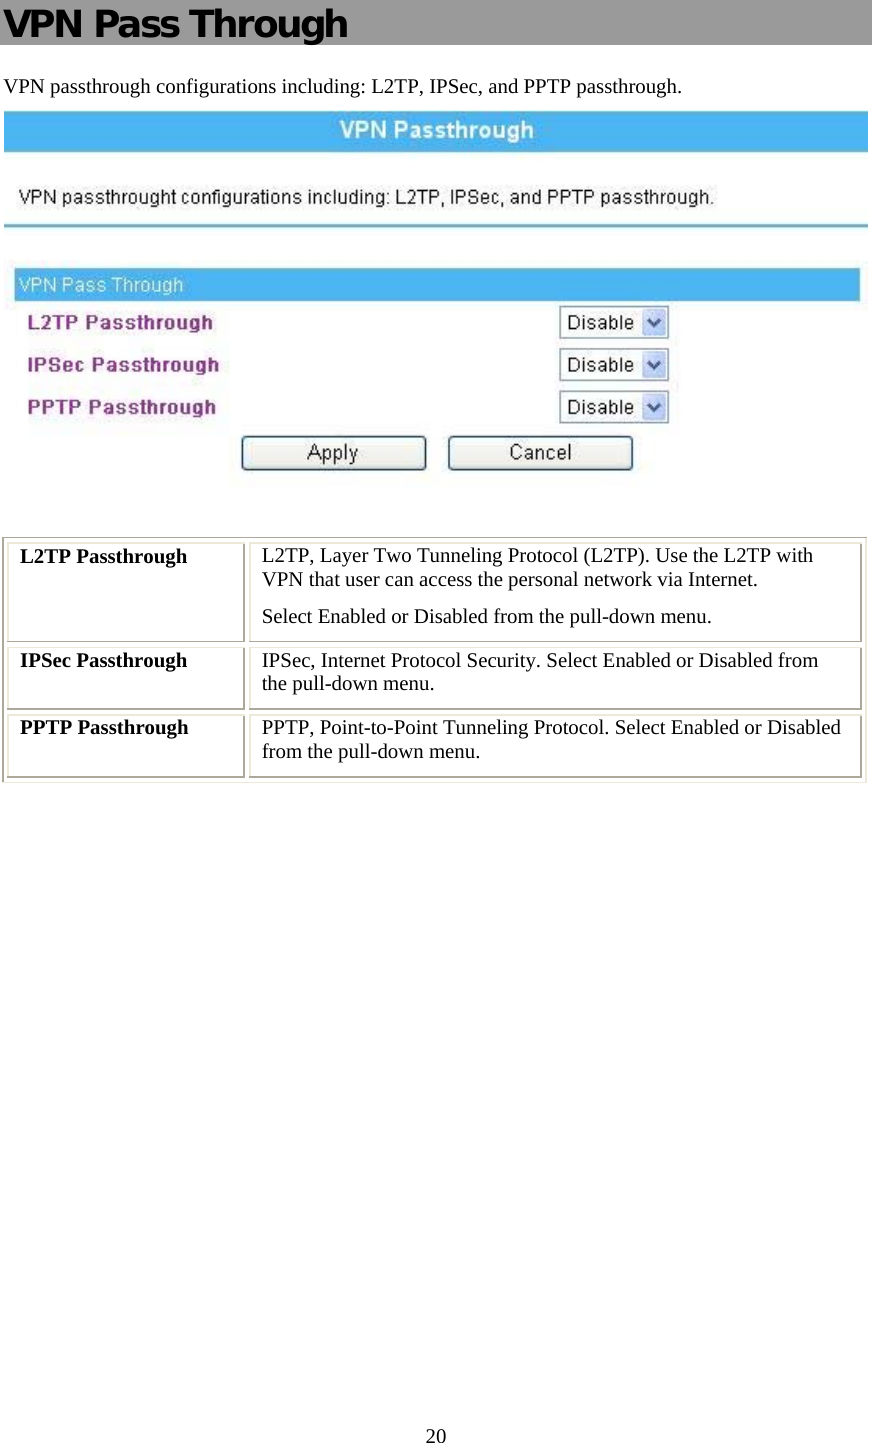   20 VPN Pass Through VPN passthrough configurations including: L2TP, IPSec, and PPTP passthrough.   L2TP Passthrough  L2TP, Layer Two Tunneling Protocol (L2TP). Use the L2TP with VPN that user can access the personal network via Internet. Select Enabled or Disabled from the pull-down menu. IPSec Passthrough  IPSec, Internet Protocol Security. Select Enabled or Disabled from the pull-down menu. PPTP Passthrough  PPTP, Point-to-Point Tunneling Protocol. Select Enabled or Disabled from the pull-down menu. 